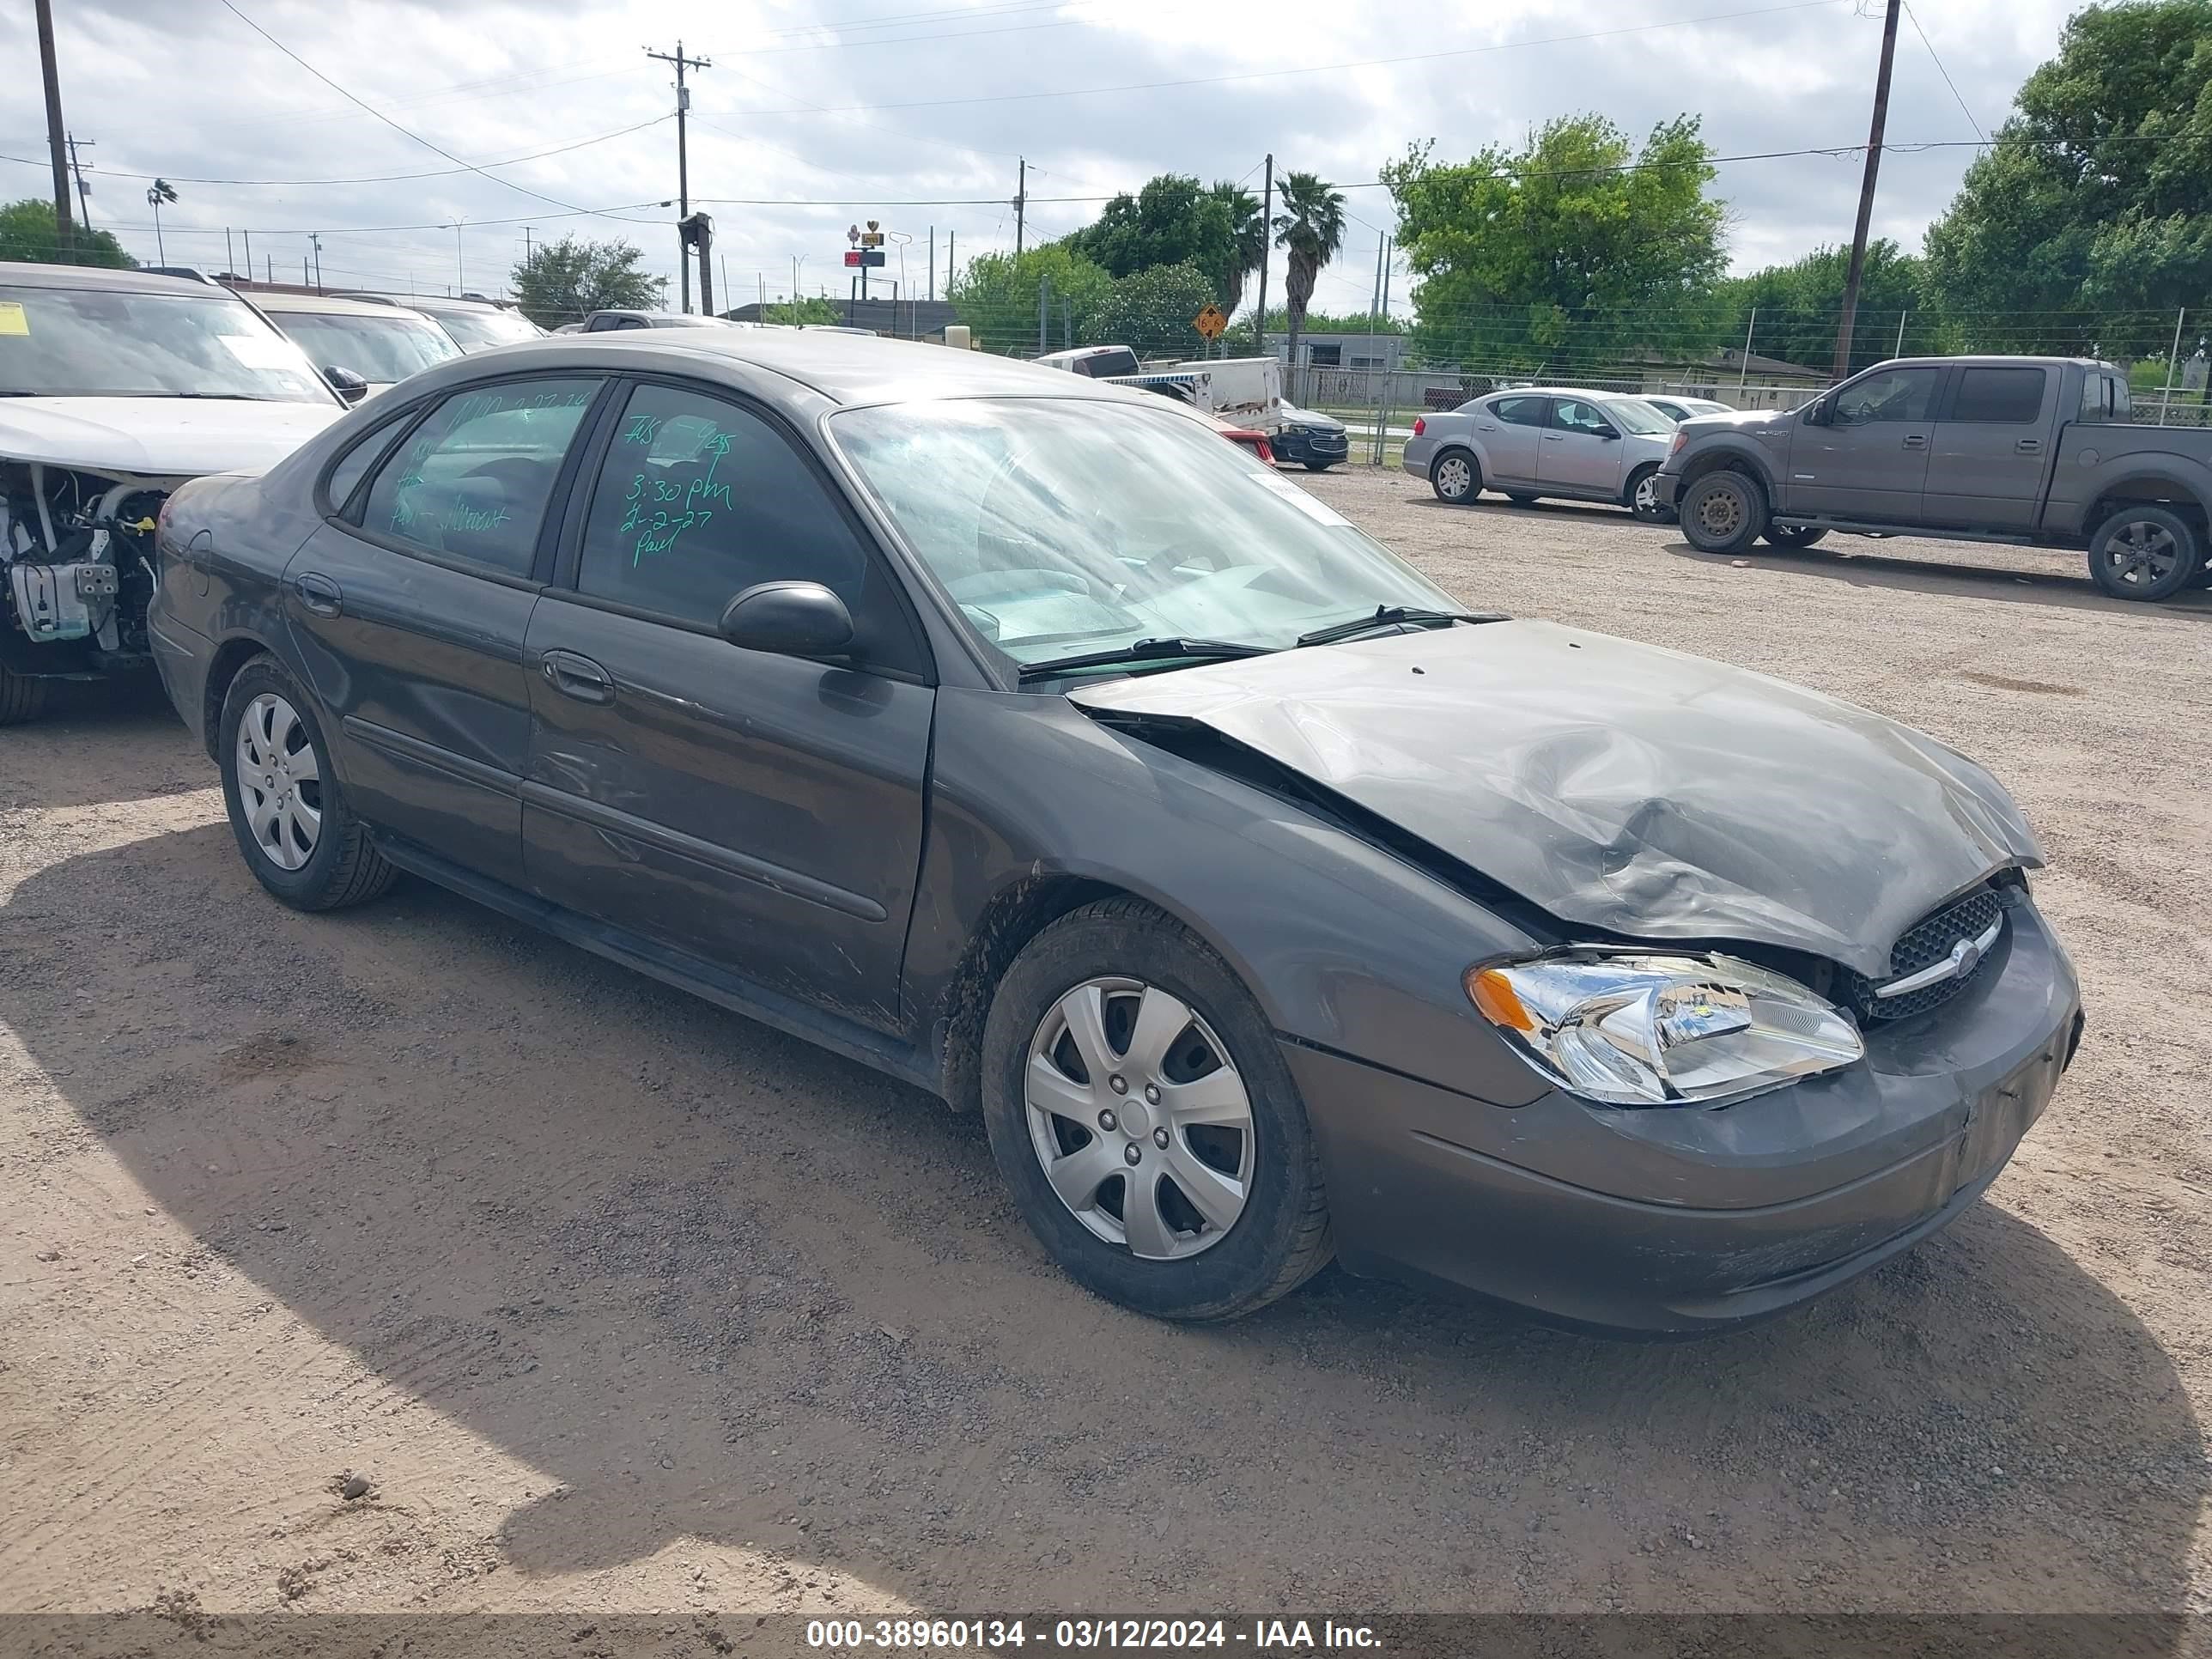 vin: 1FAFP52U03A120520 1FAFP52U03A120520 2003 ford taurus 3000 for Sale in 78537, 900 N Hutto Road, Donna, Texas, USA